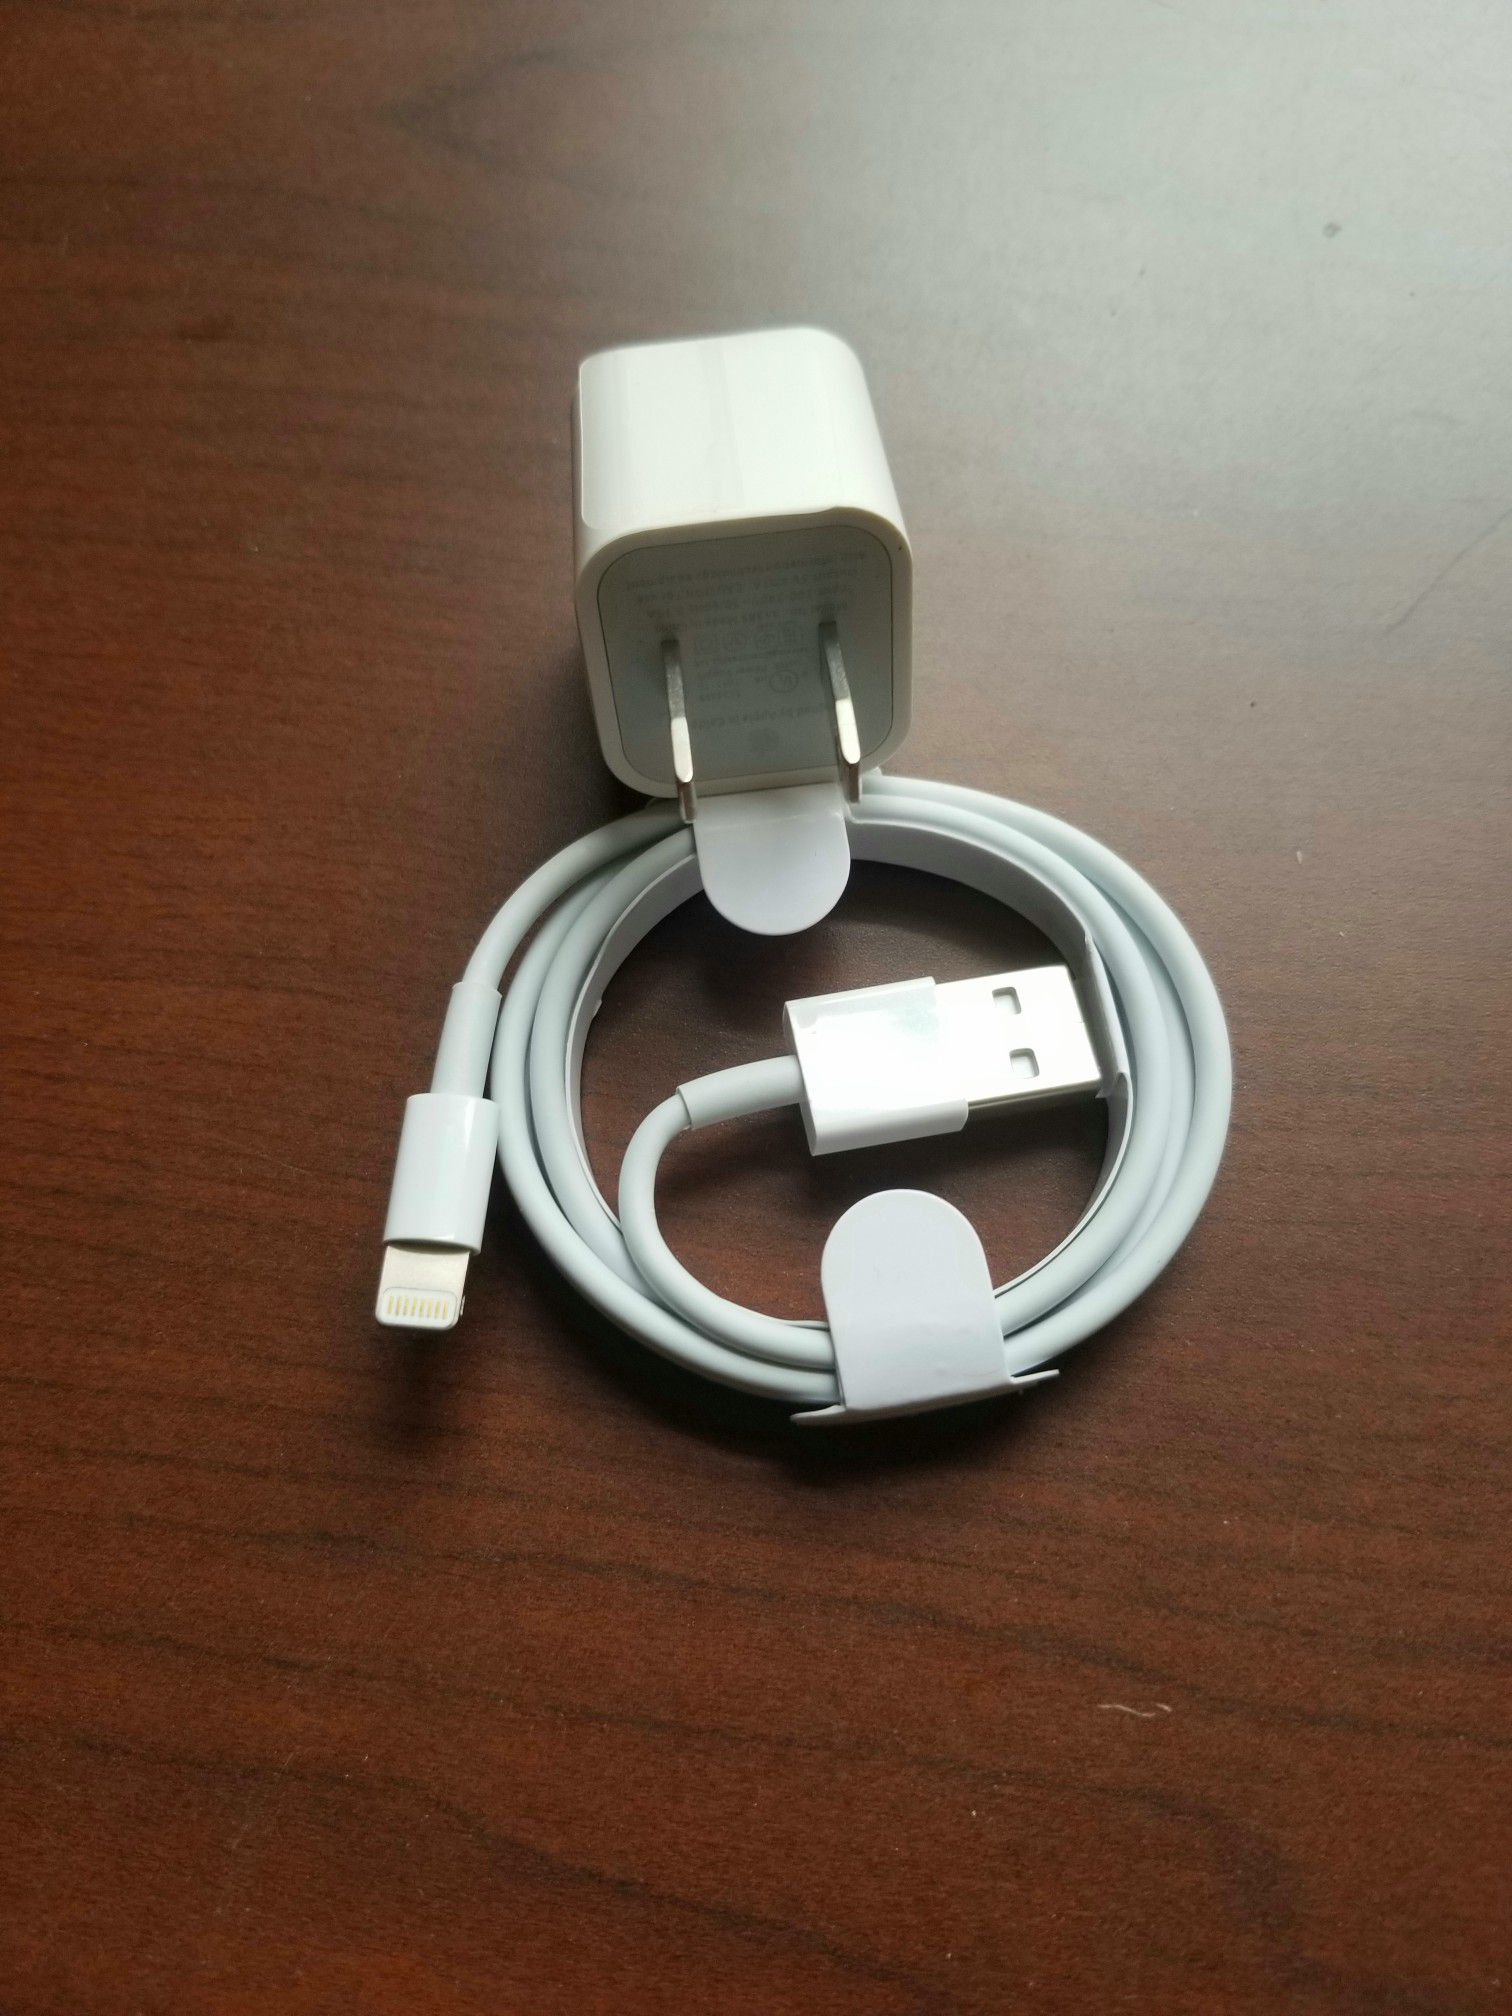 Brand new original iphone charger